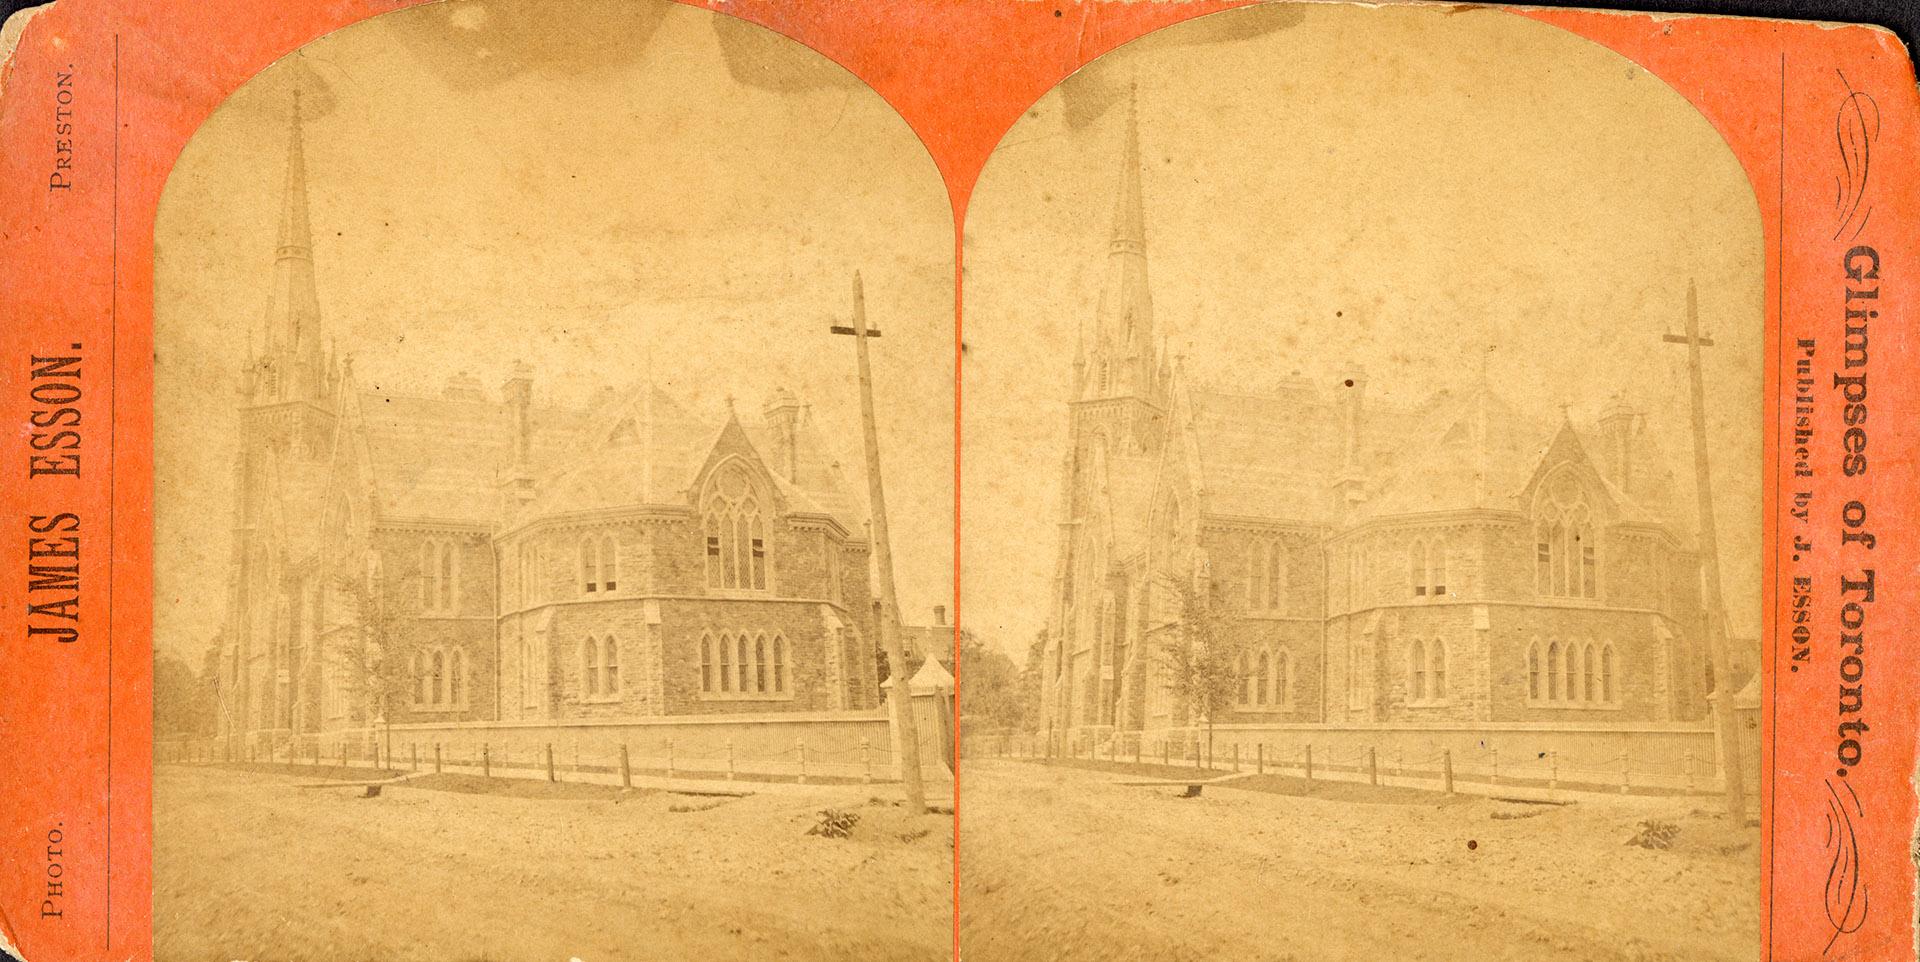 Pictures show a large stone church with a tall steeple.